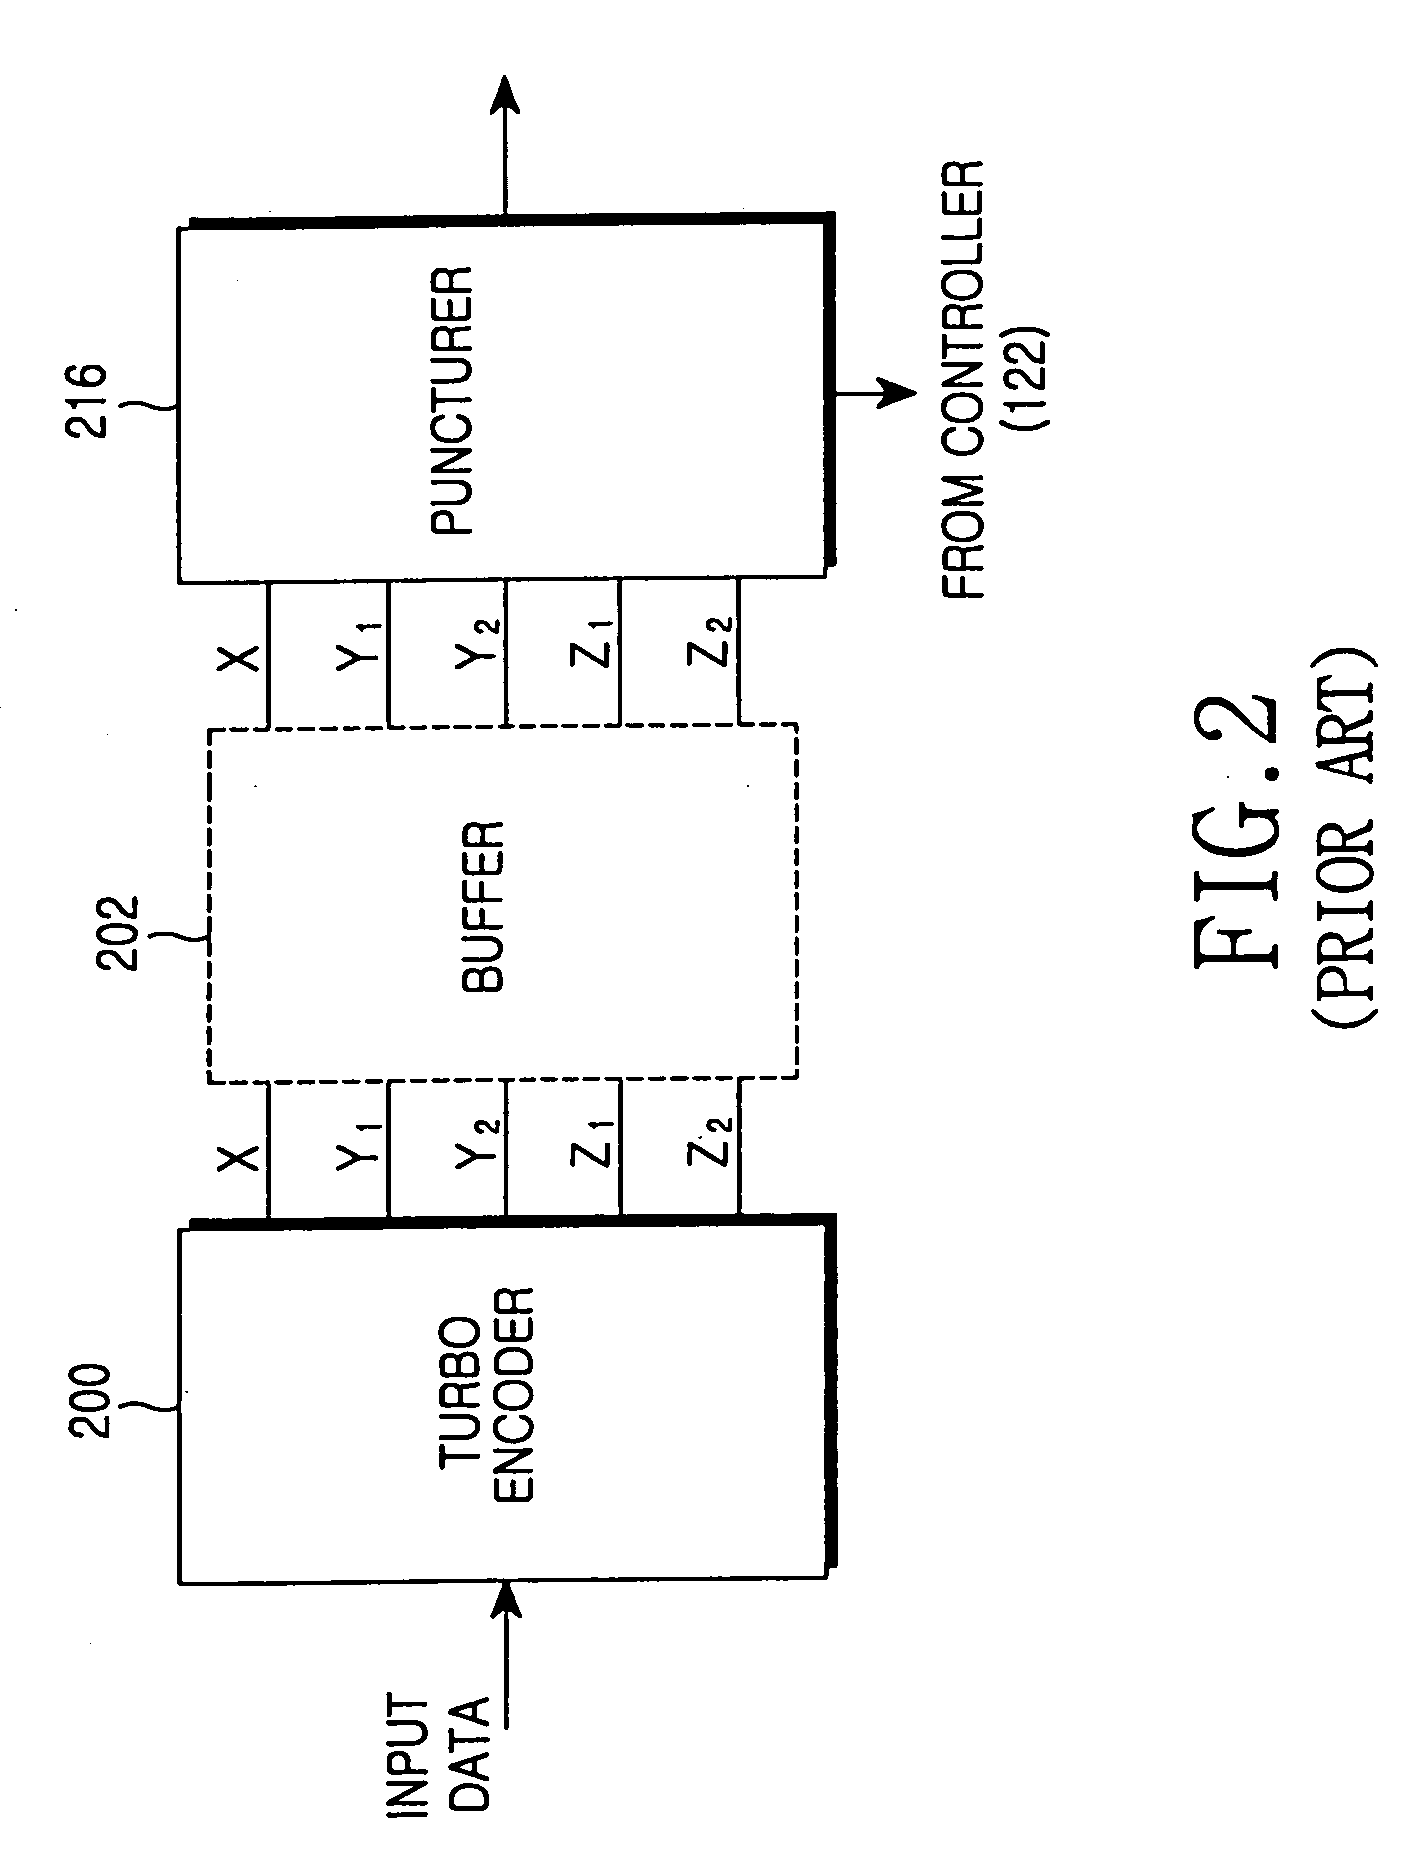 Transceiver apparatus and method for efficient retransmission of high-speed packet data